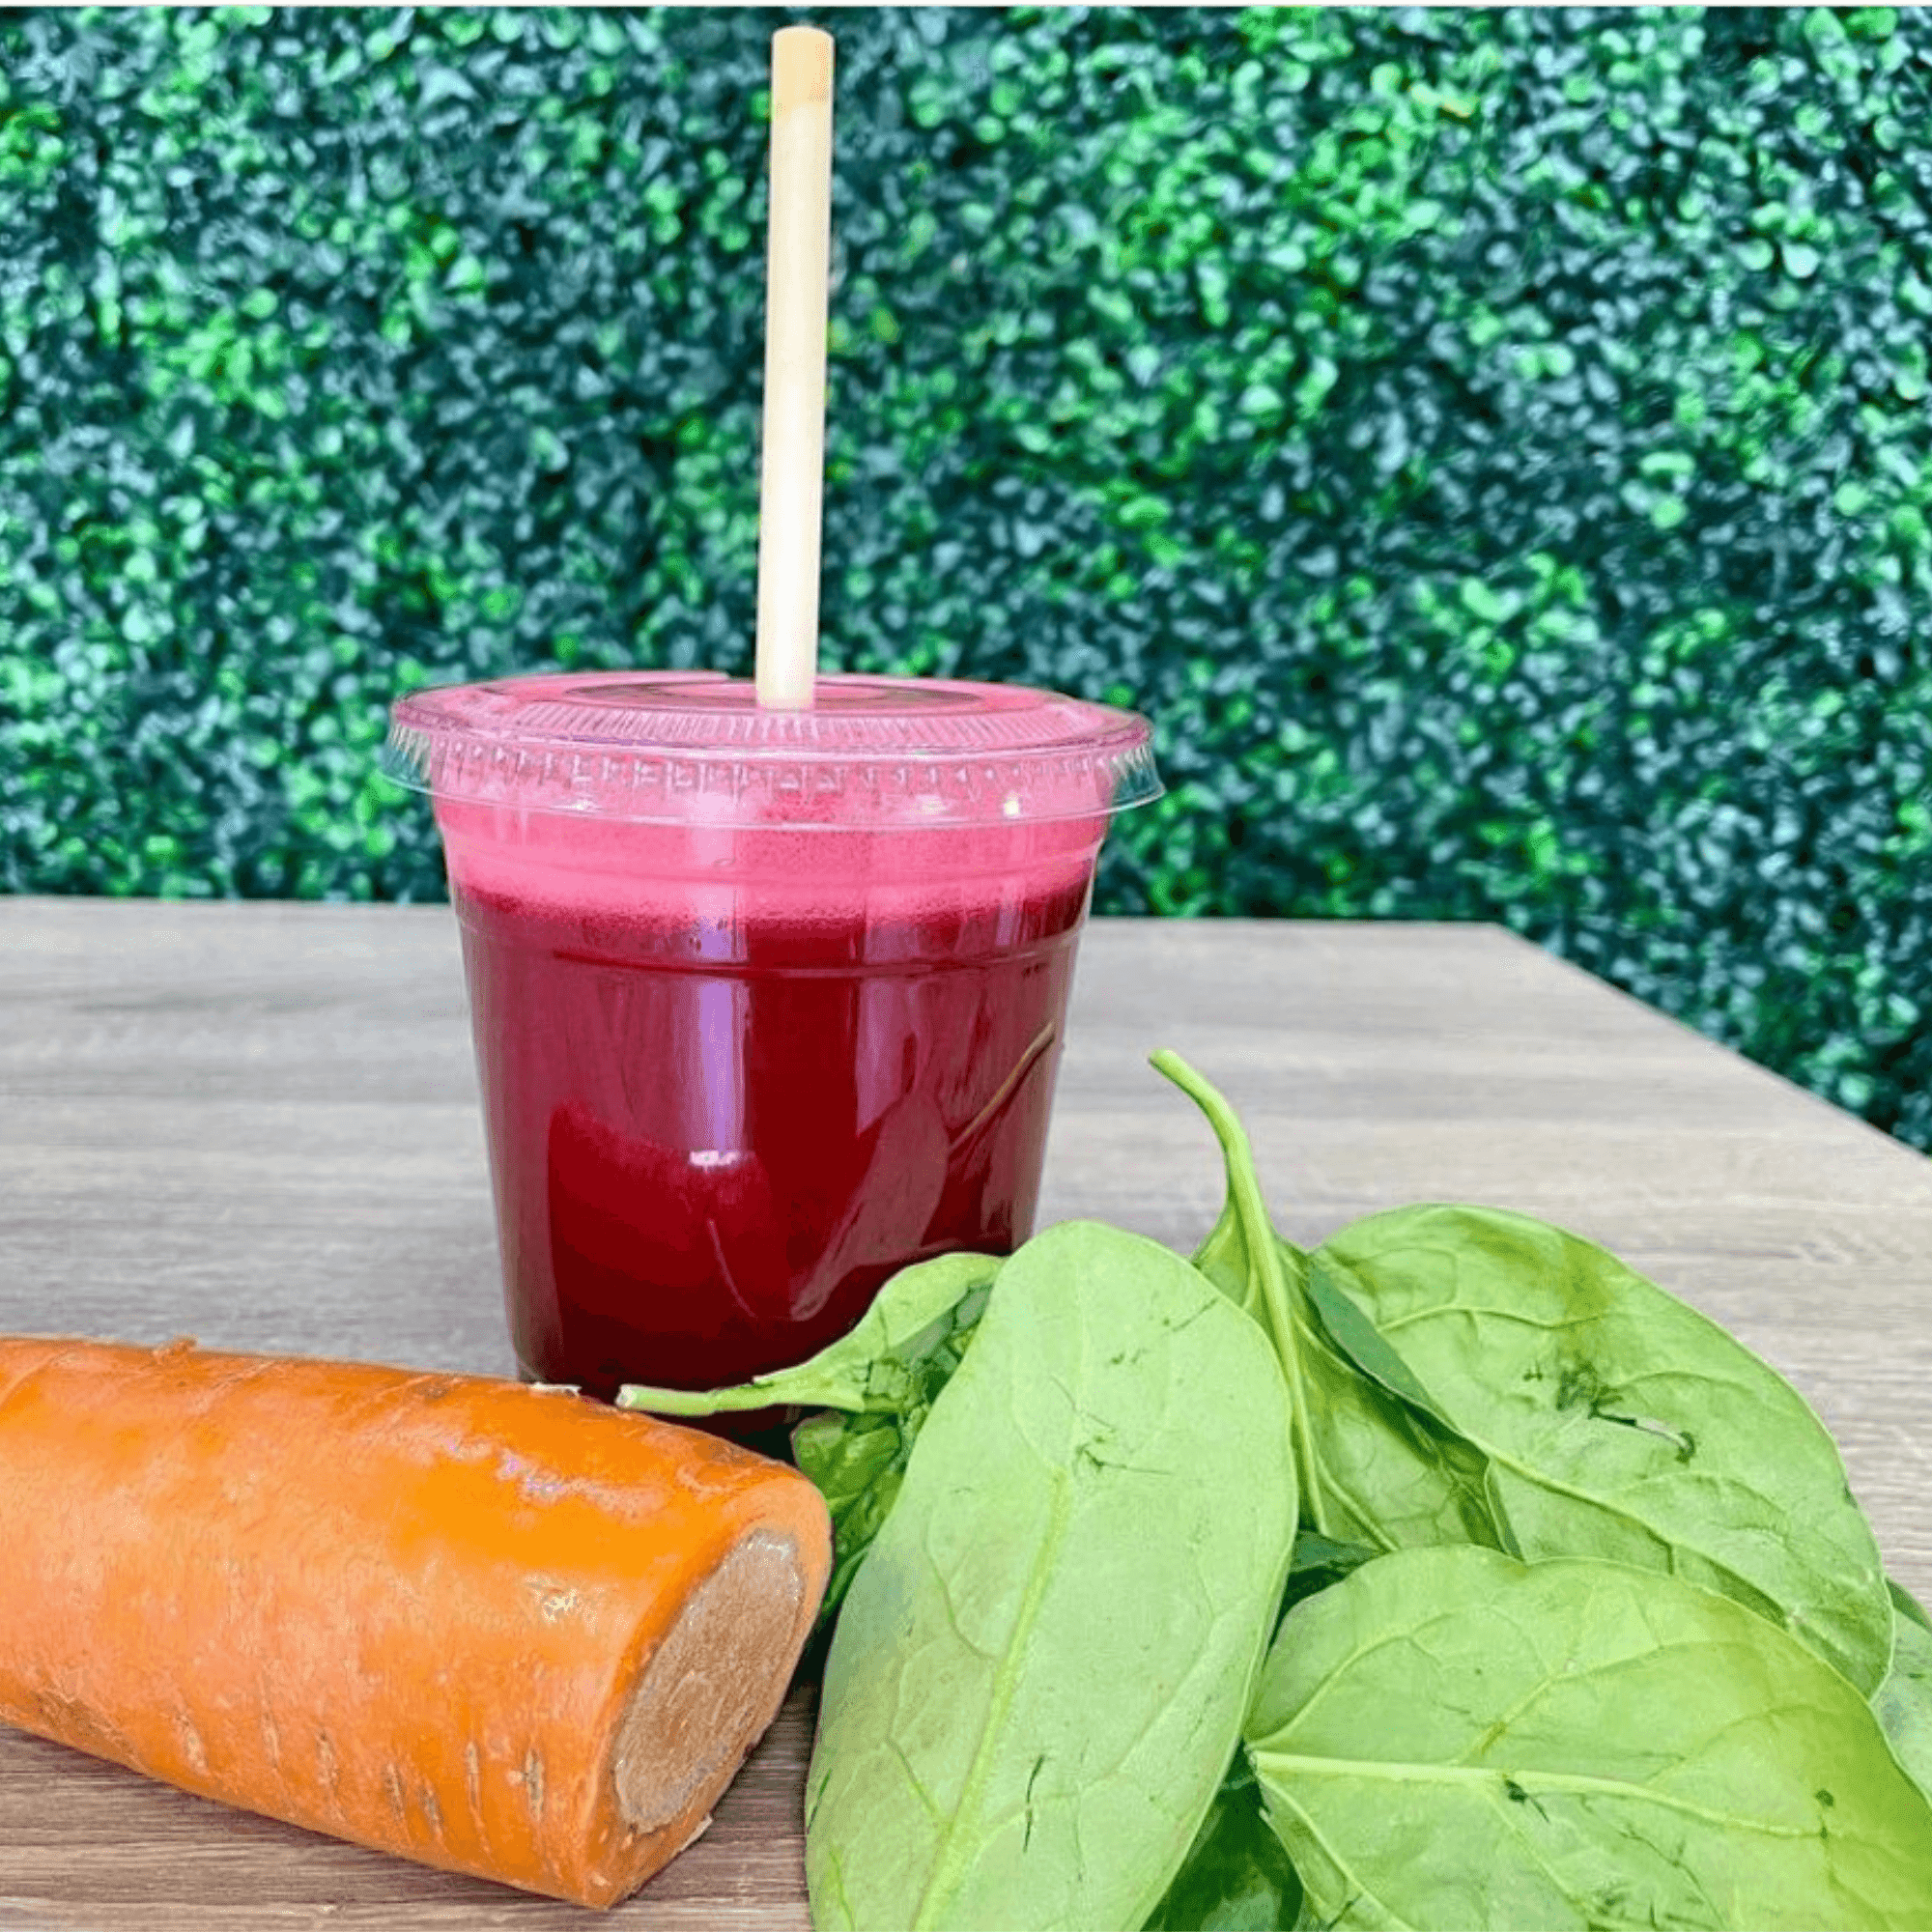 A beet-infused juice is served in a clear cup with a biodegradable straw made from reed stems. The cup is placed on a wooden table next to a raw carrot and fresh spinach leaves. The background is a lush green wall, creating a natural and refreshing atmosphere that emphasizes the juice's healthy and organic ingredients. The straw's sustainable material highlights an eco-friendly and health-conscious approach.